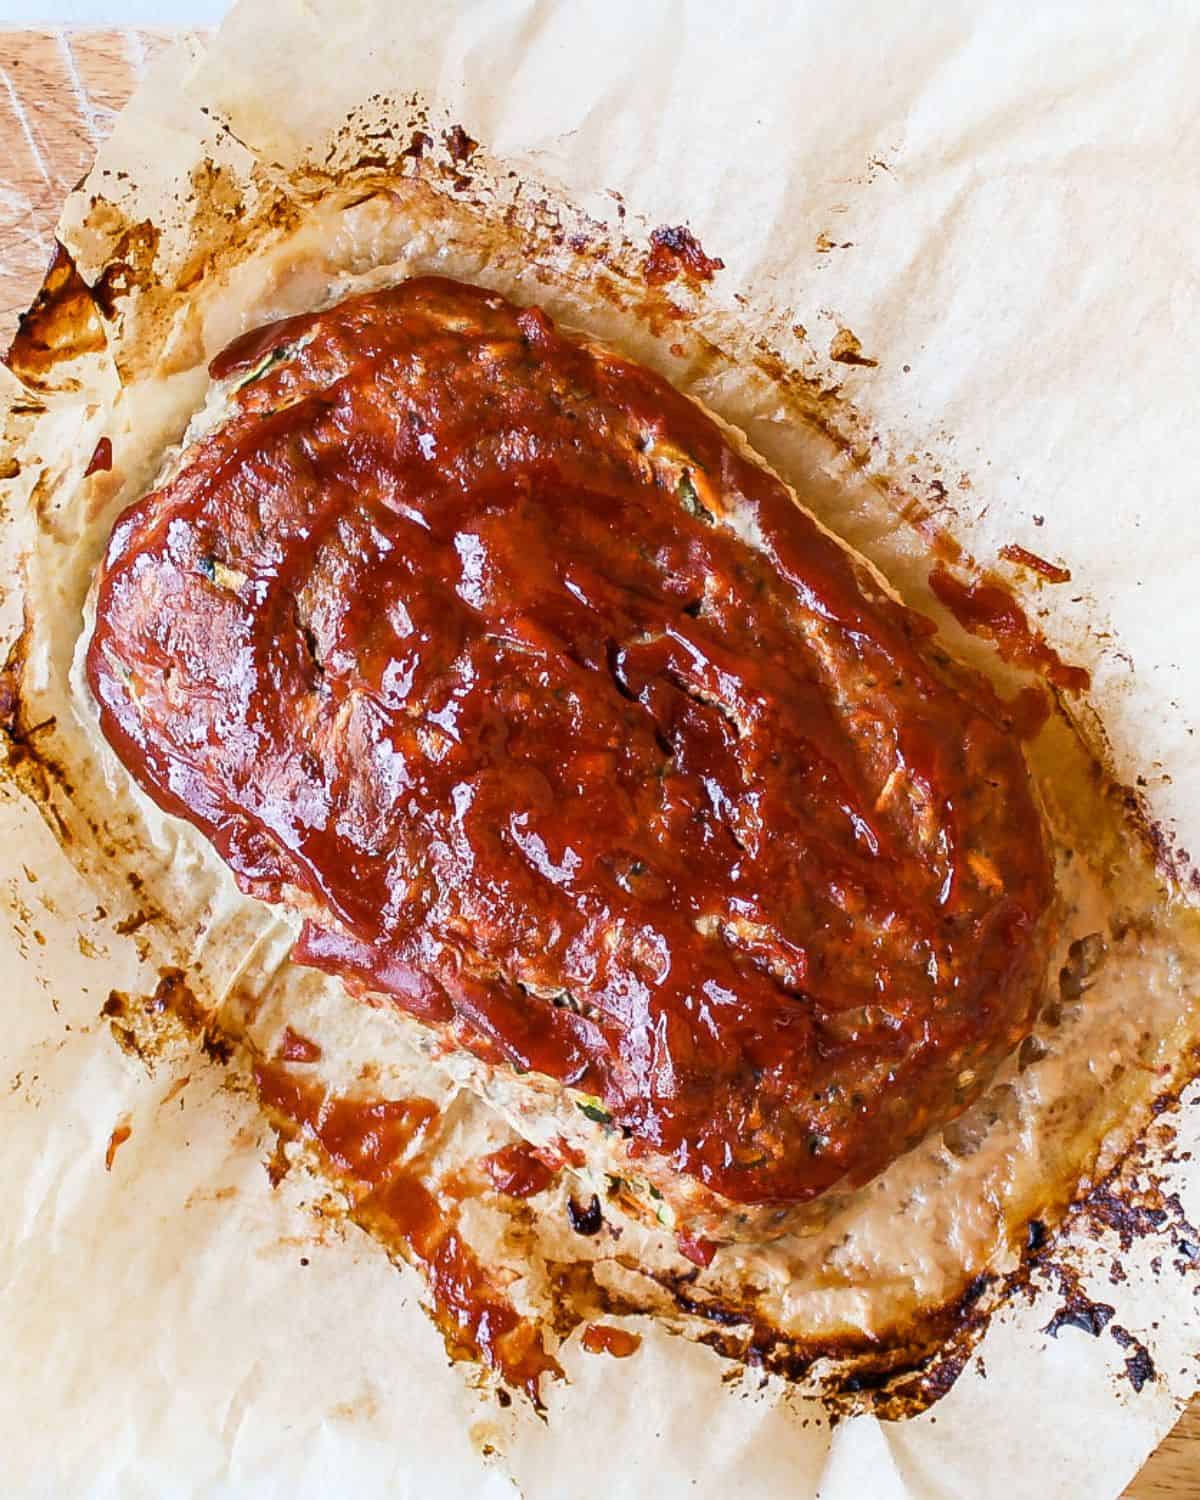 A meatloaf glazed with ketchup on top on a sheet of parchment paper.